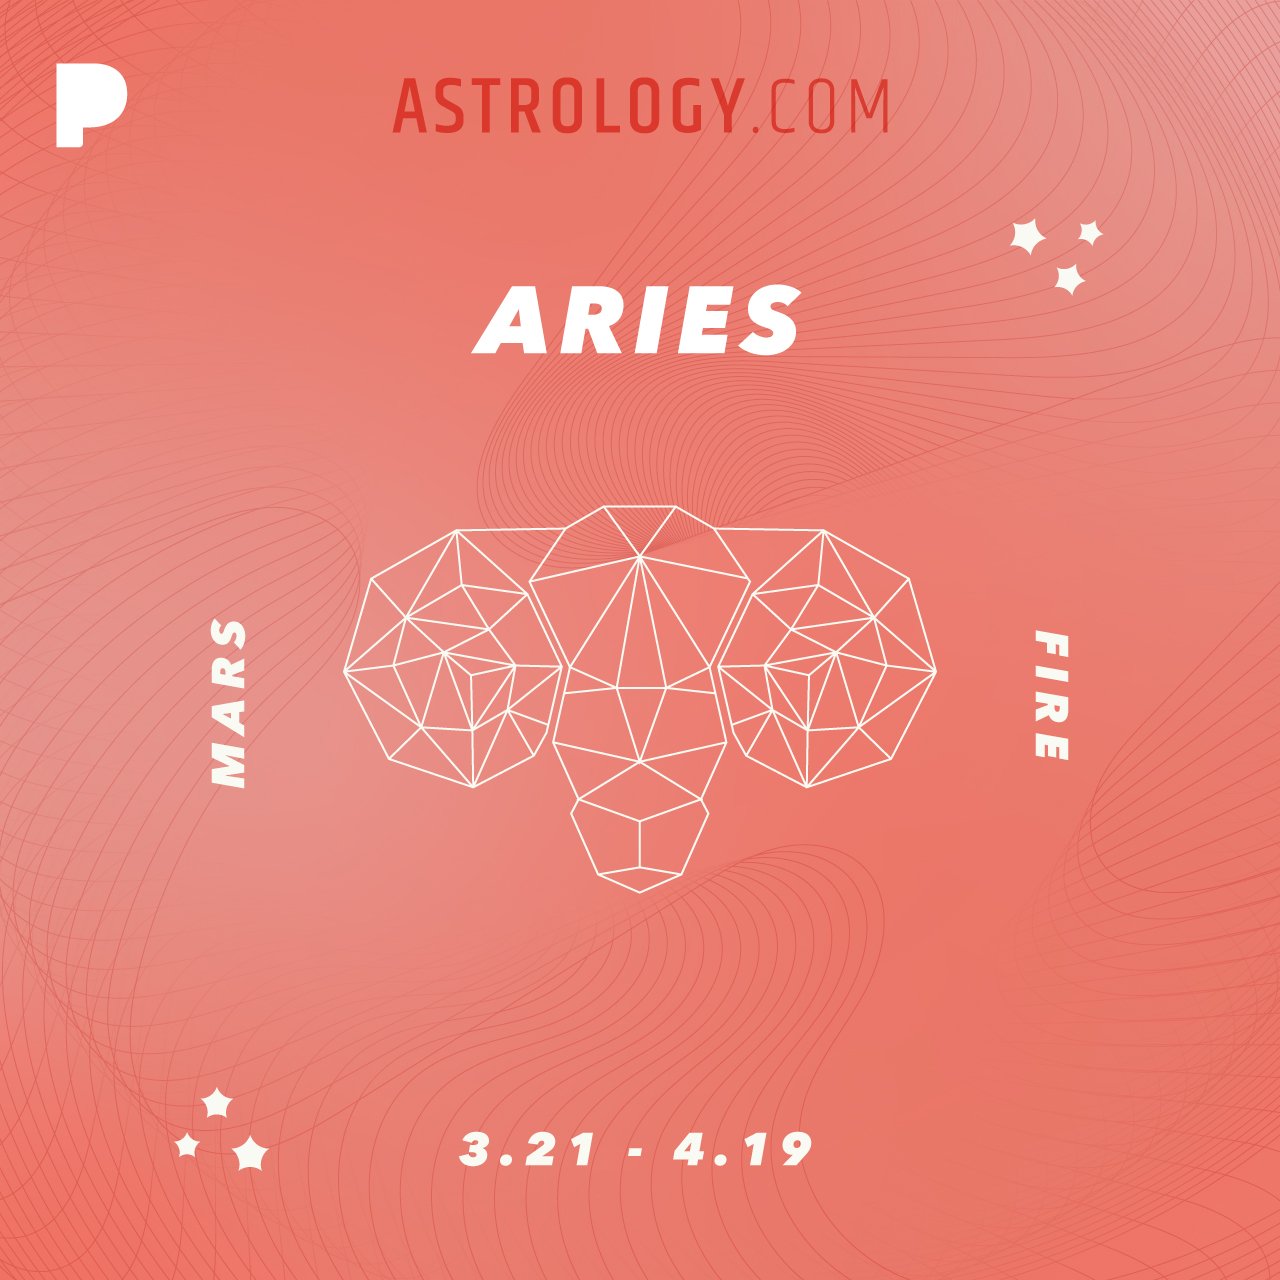 Turn the Volume Up! Your Pandora Aries Season Playlist Will Get You Through the Gloomiest Days